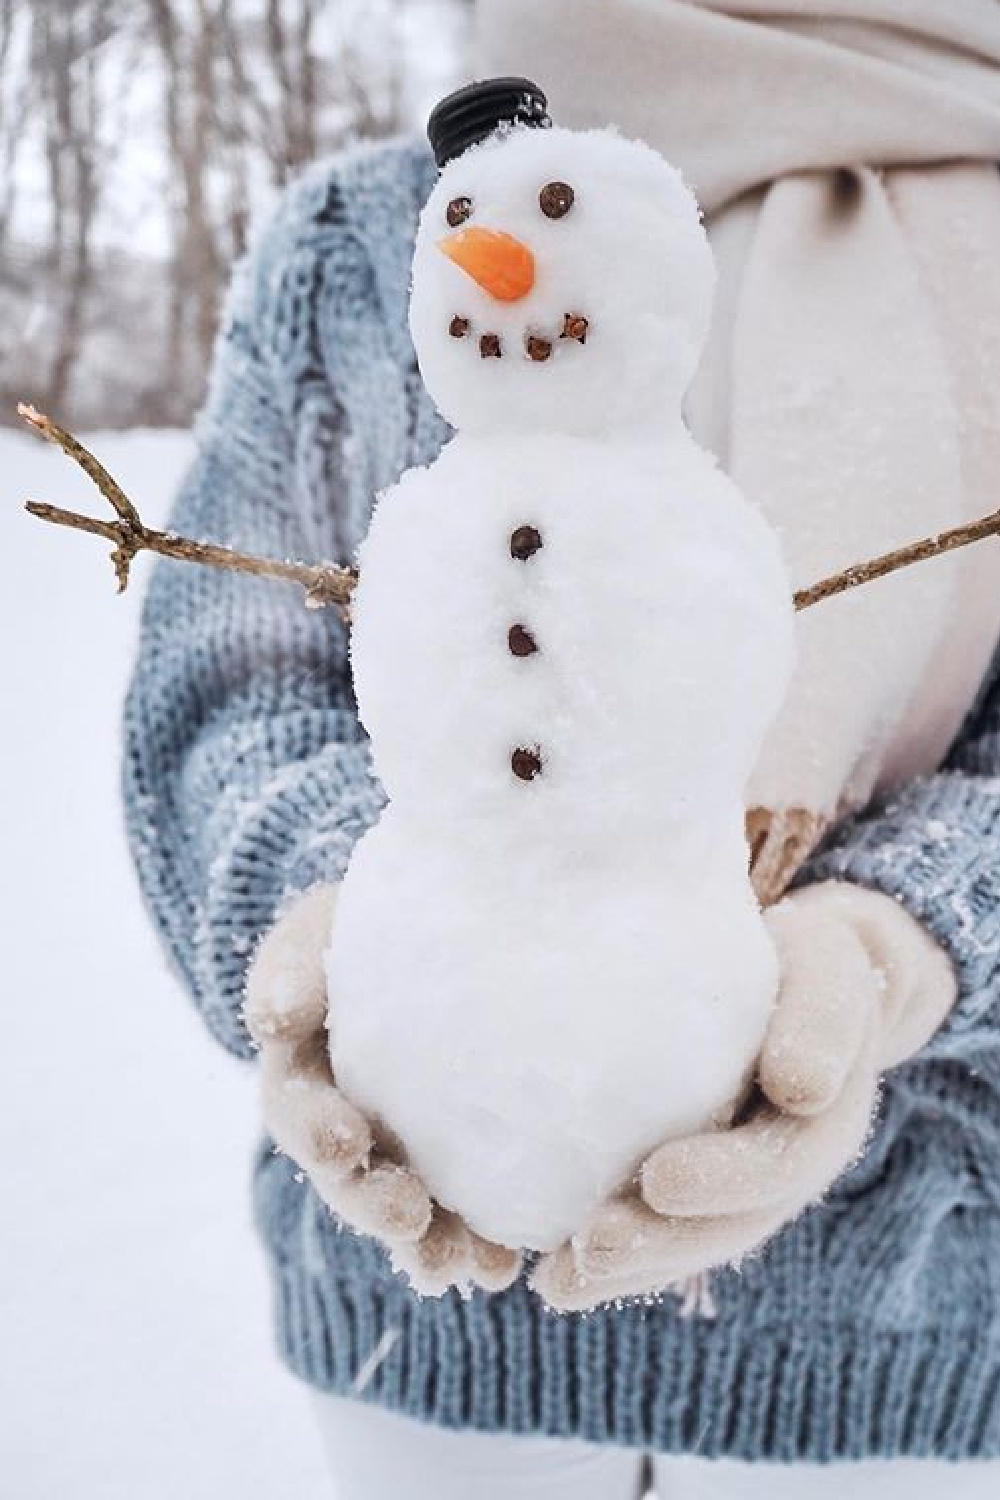 Mini snowman with mittens and blue sweater - @nadiine.o. #snowman